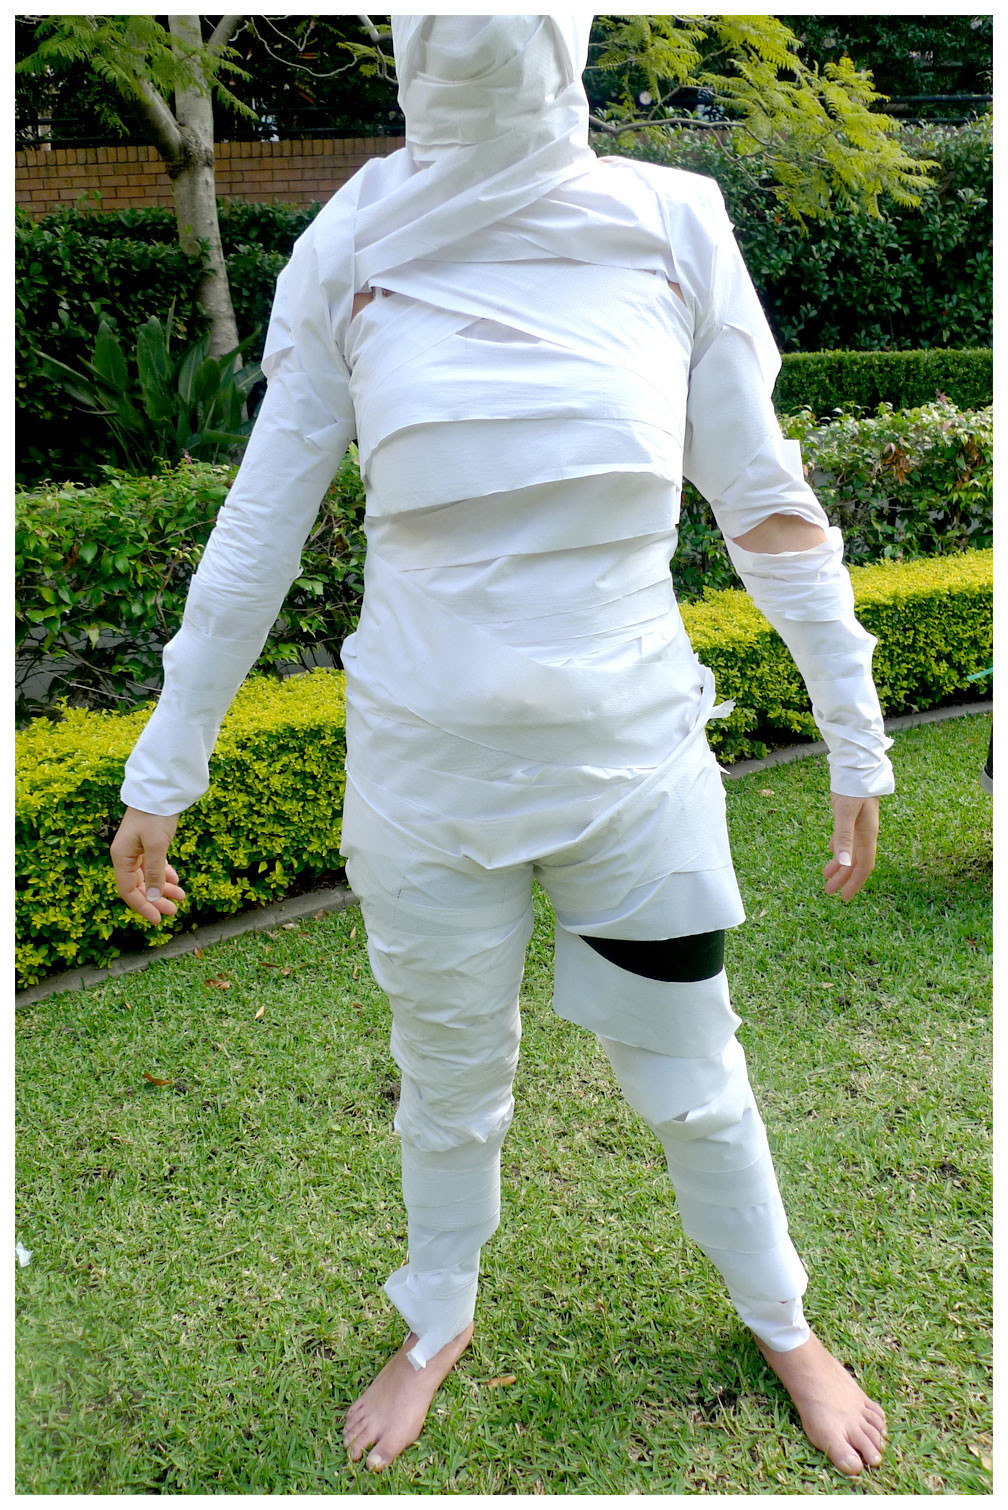 Toilet Paper Halloween Costume
 8 Halloween Costumes That Will Have Your Friends Running